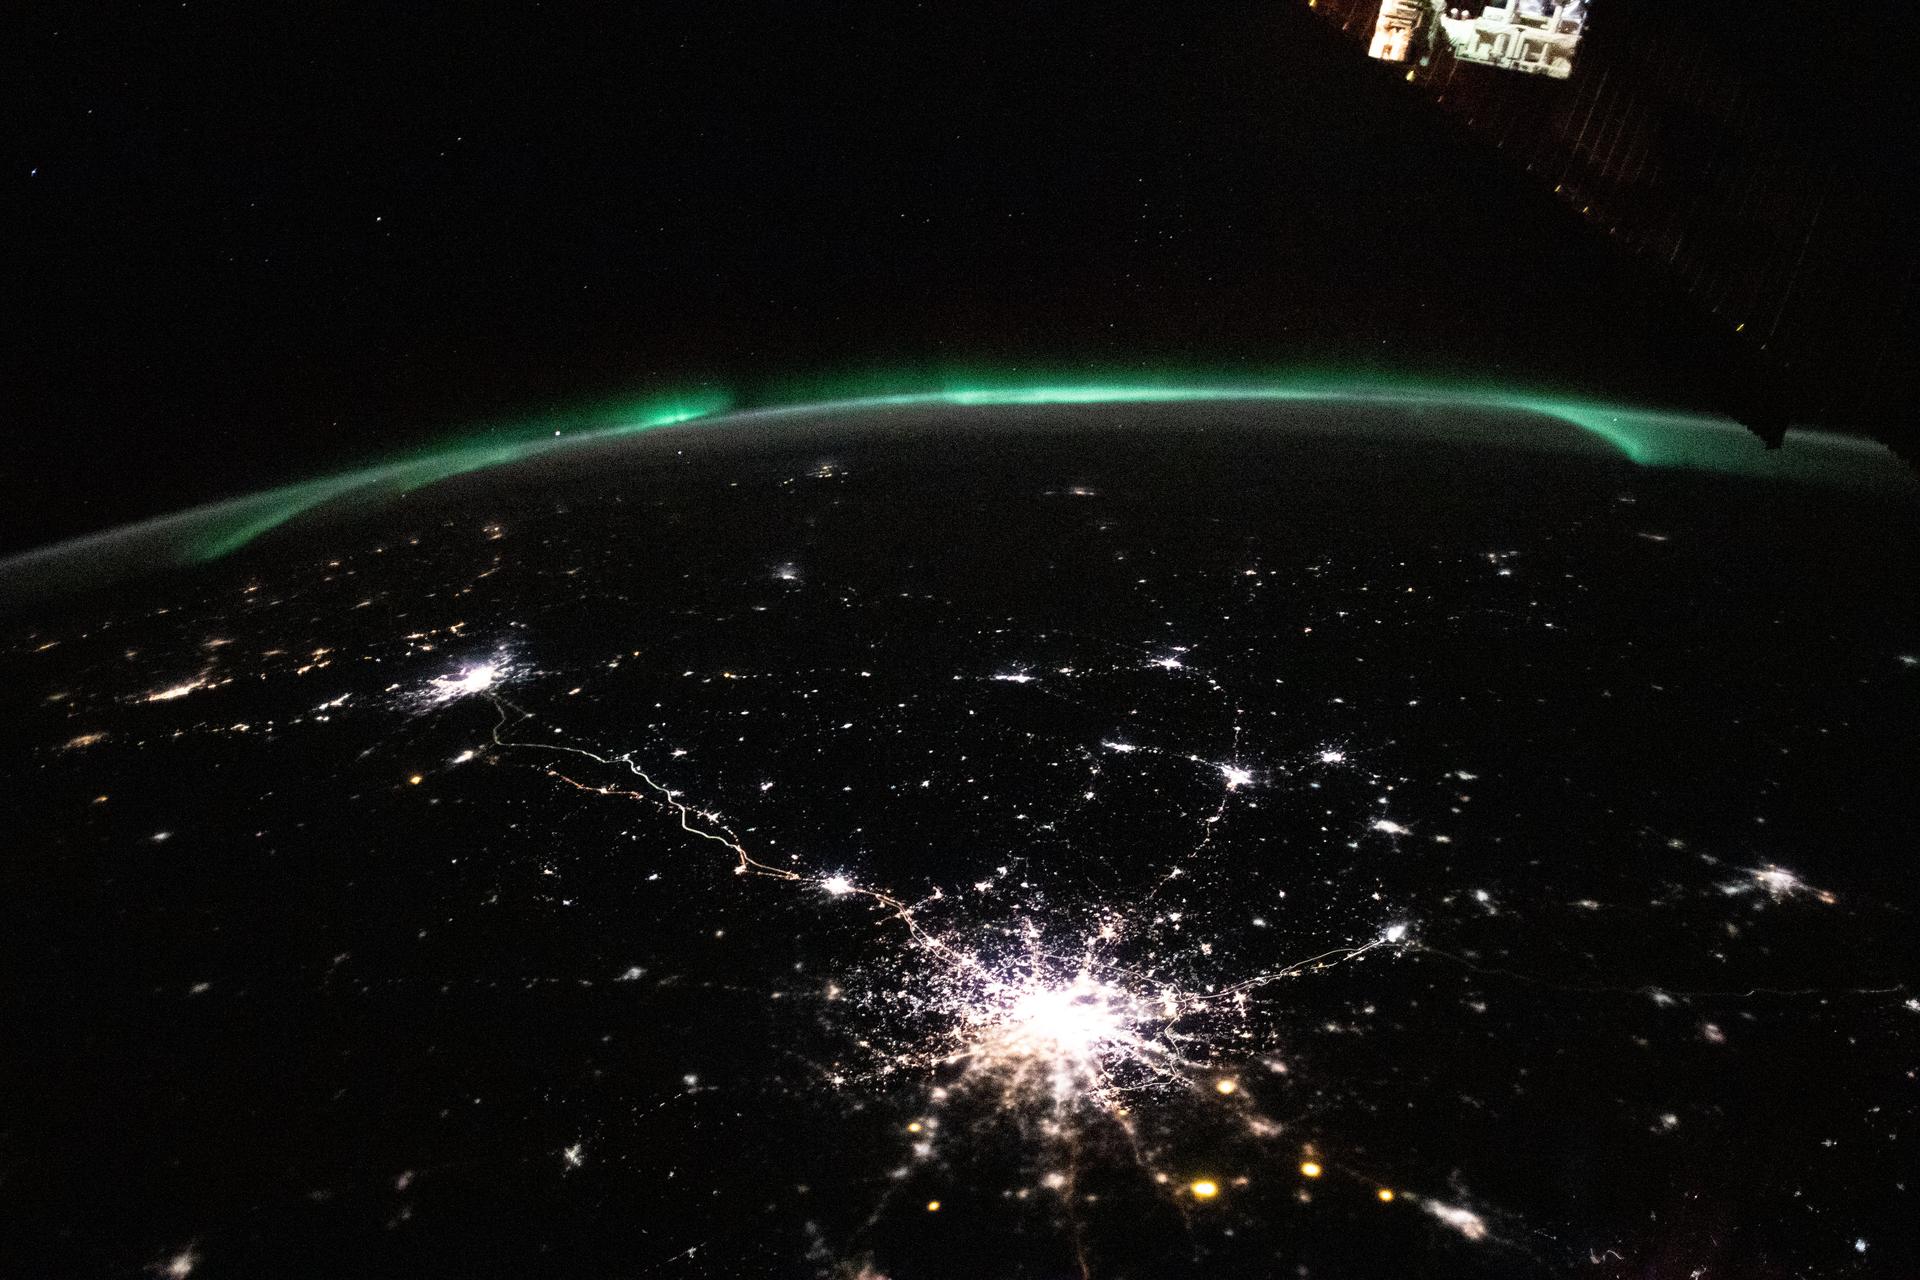 city lights in the night's sky with a green aurora overhead